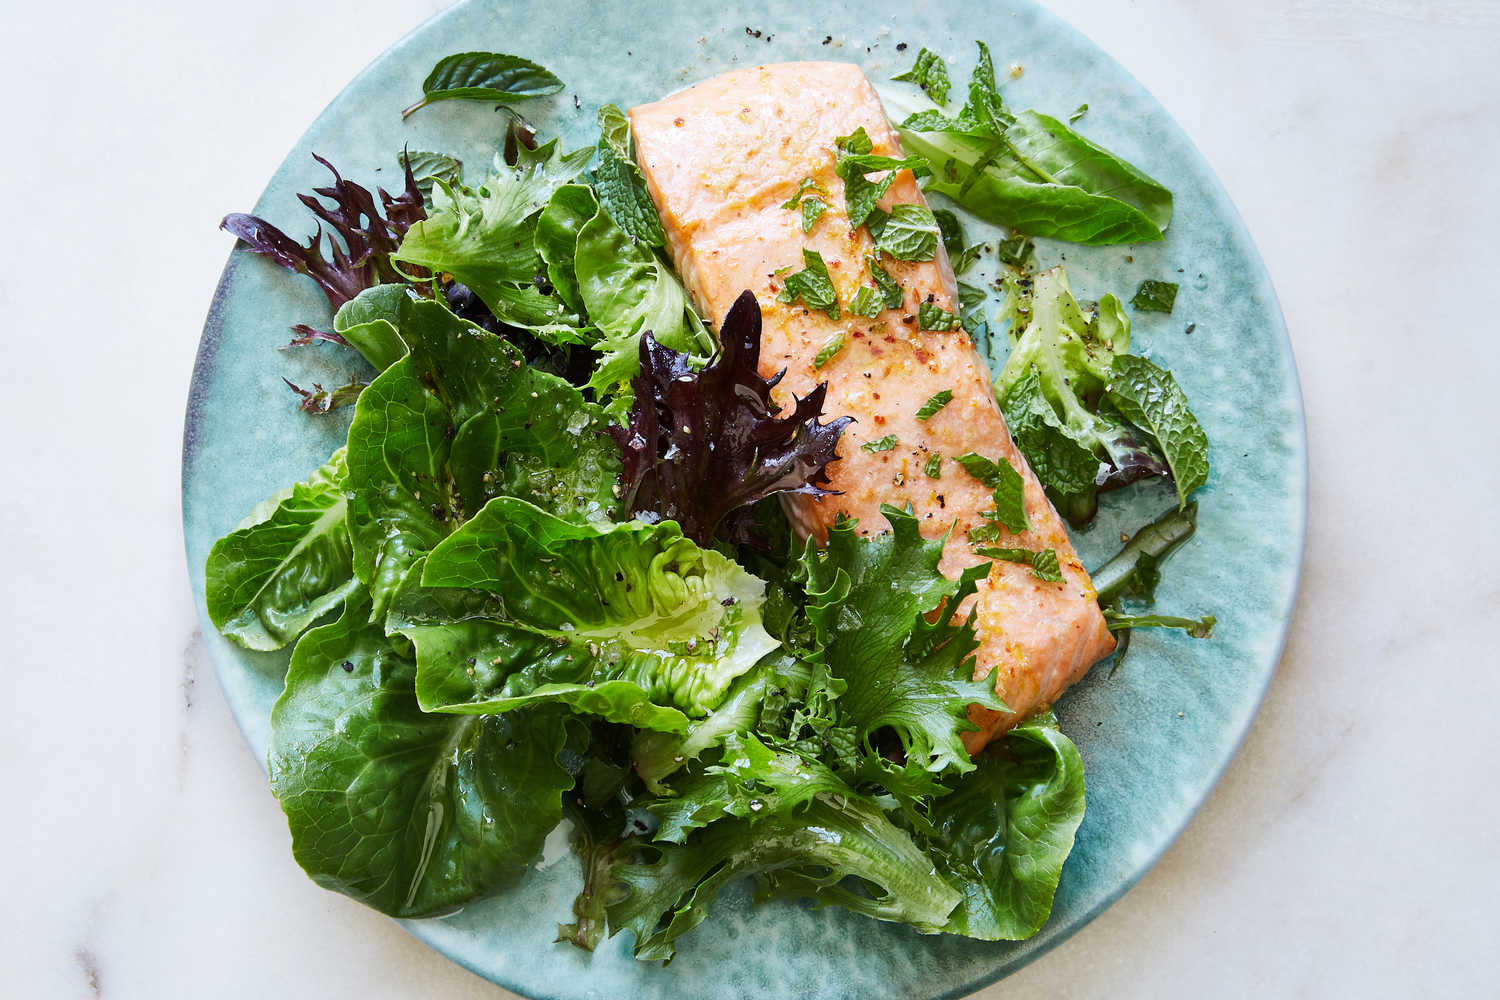 Broiled Salmon With Chile, Orange and Mint